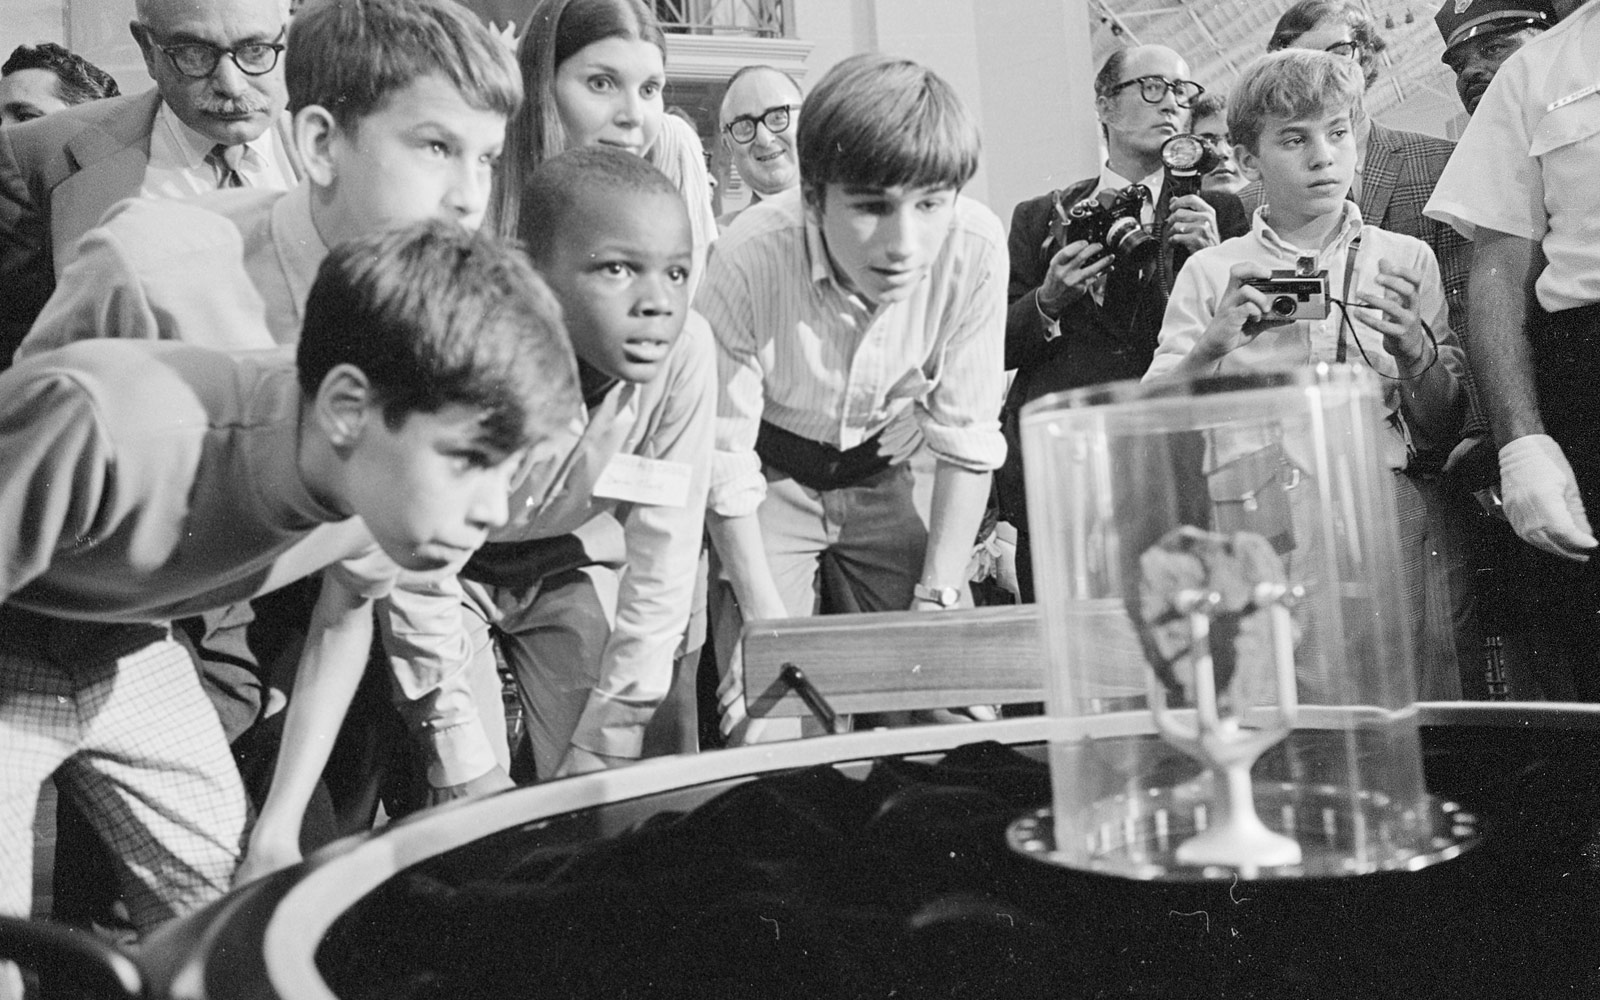 A crowd of visitors looking at the lunar sample on exhibit in the Rotunda of the Arts and Industries Building . Nova York, 1970